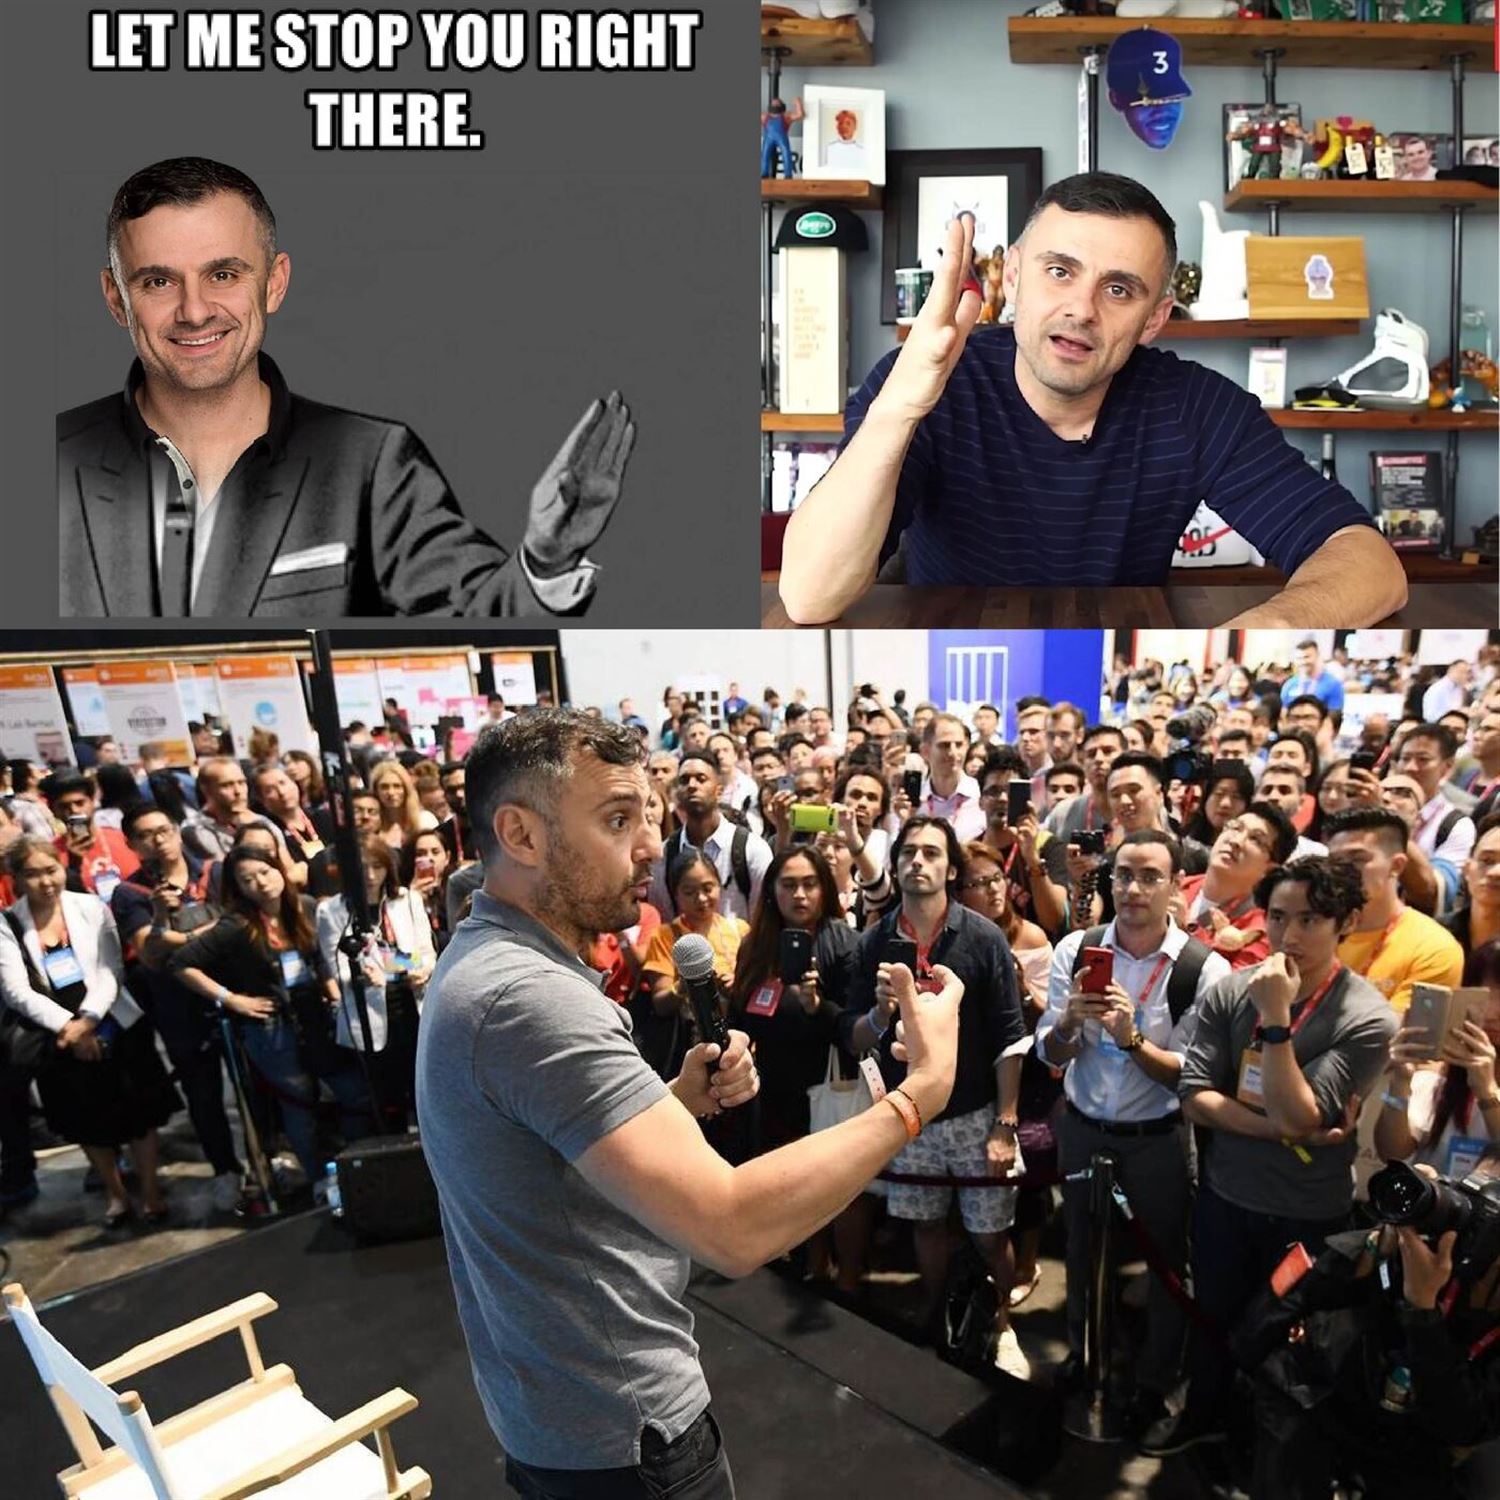 Gary Vee & people who tend towards being obnoxious